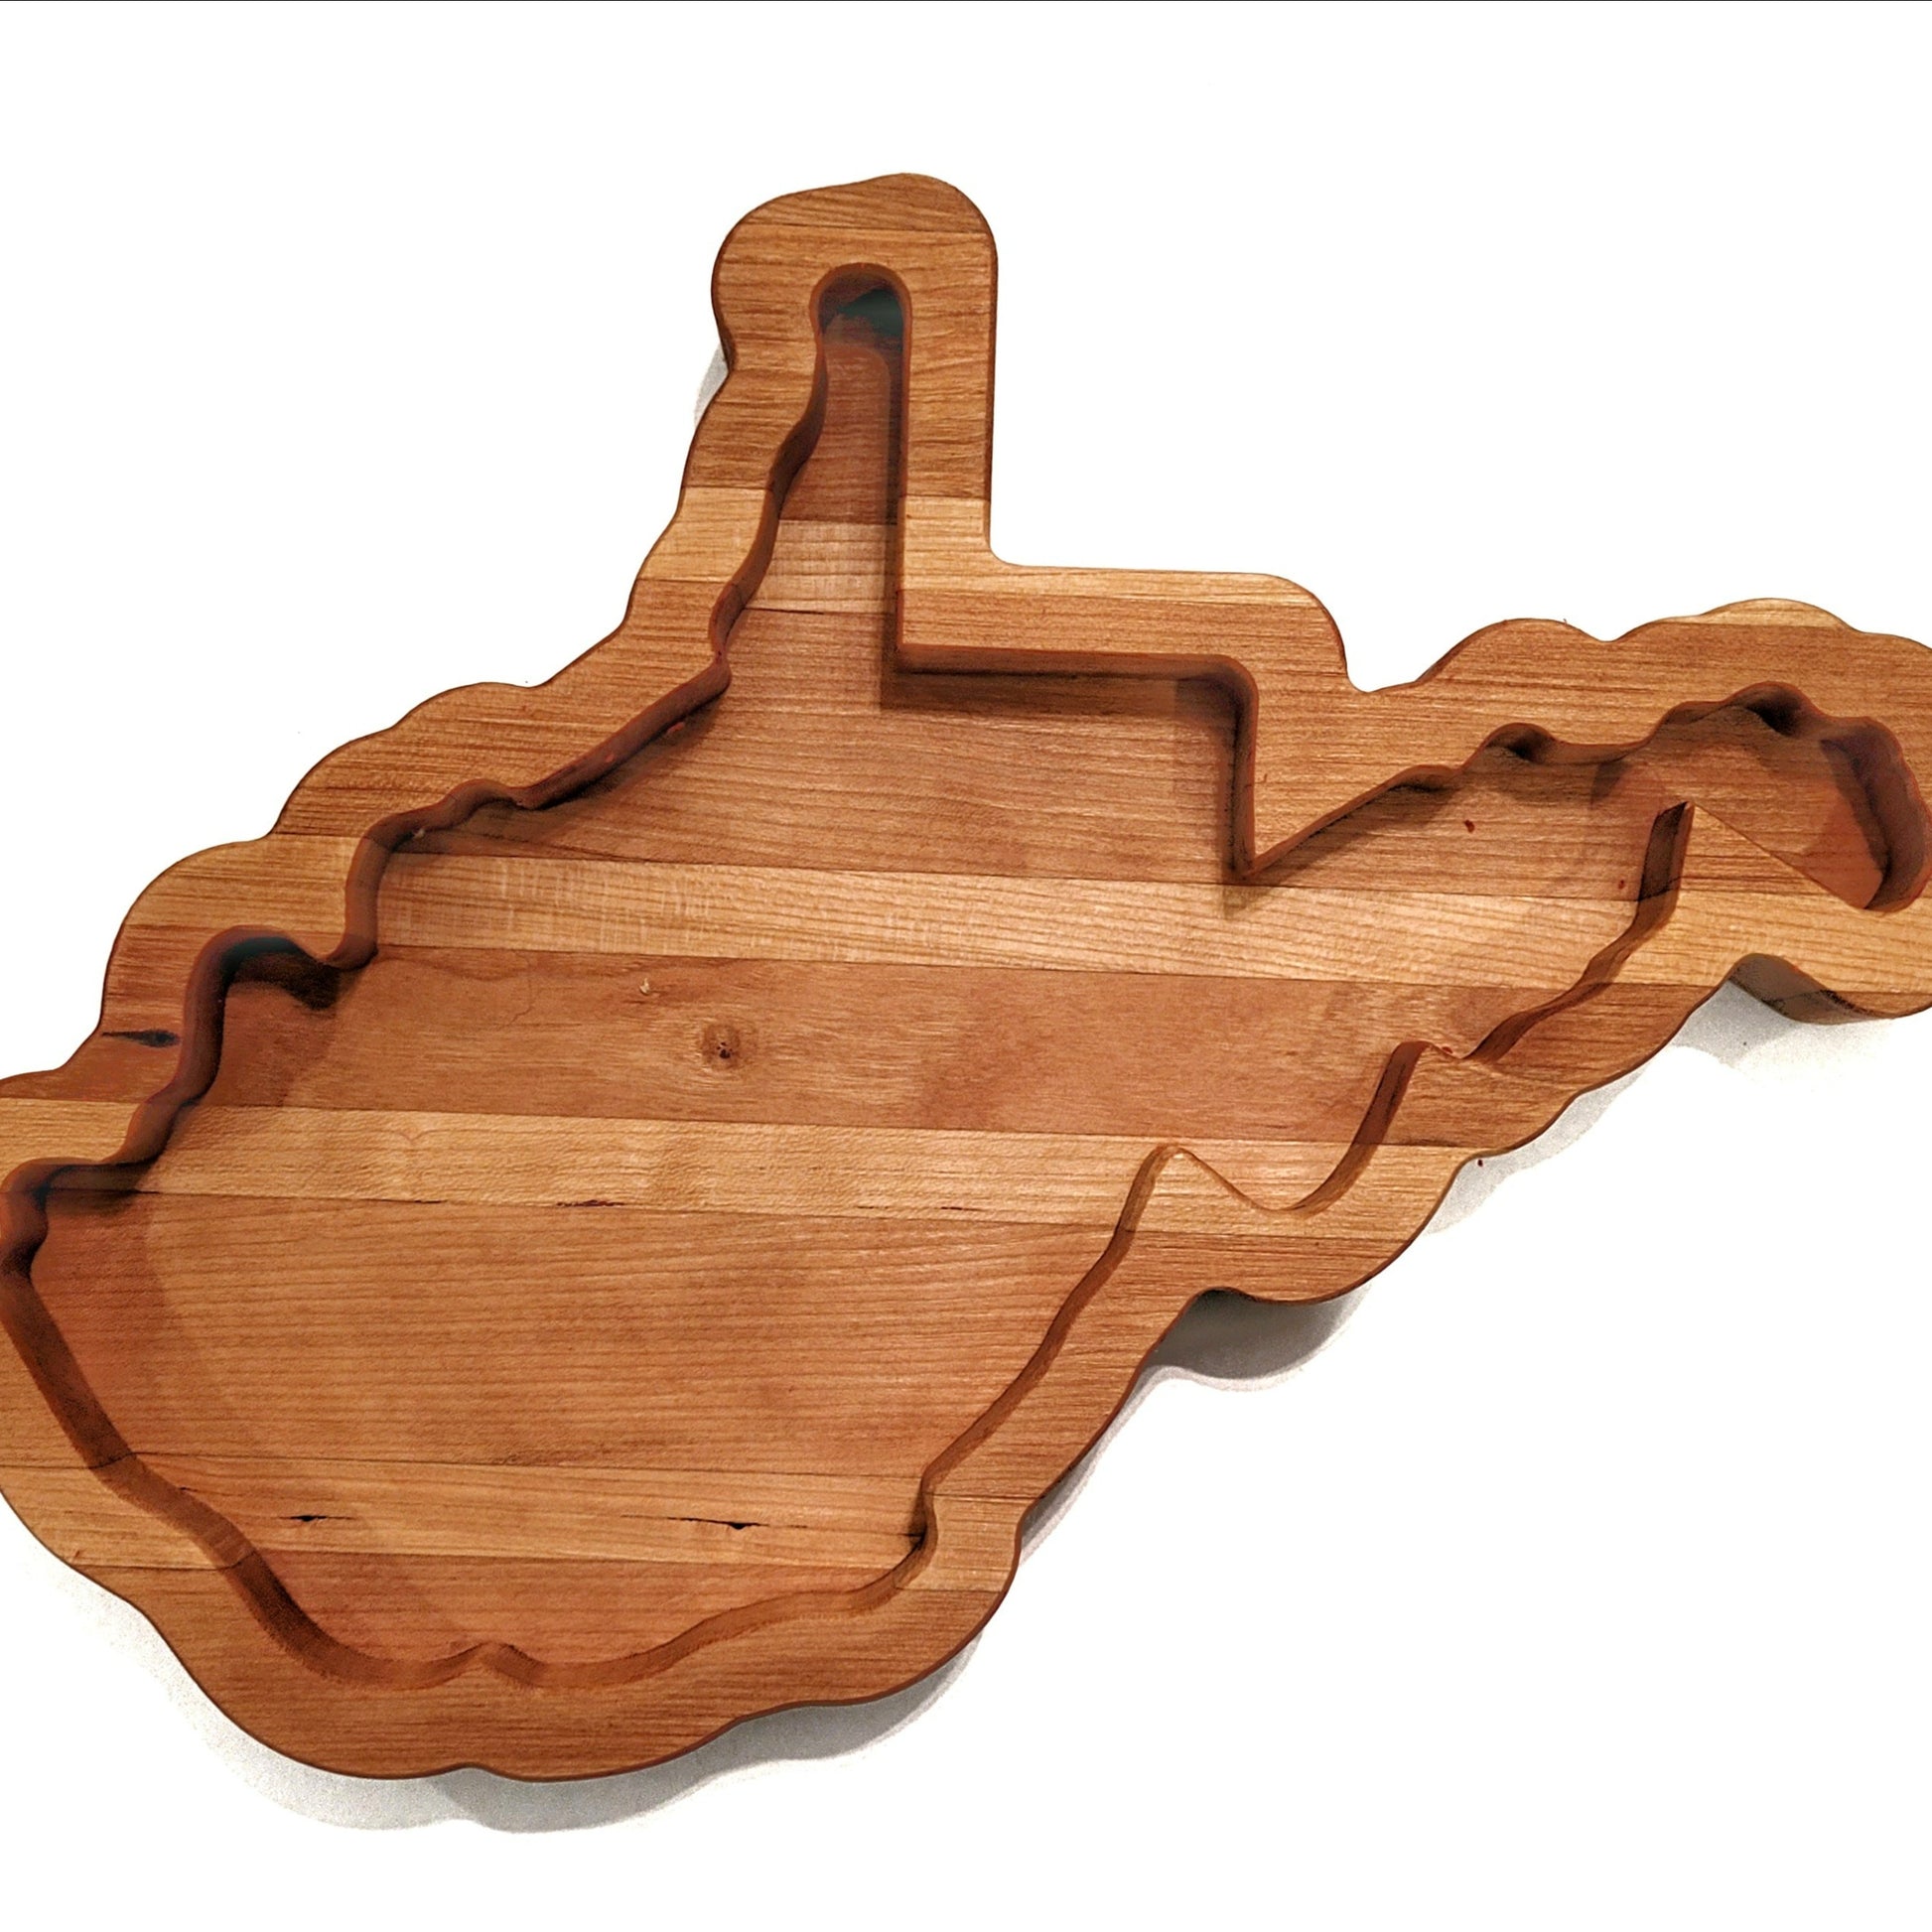 West Virginia shaped wooden charcuterie board with option to personalize with name or message